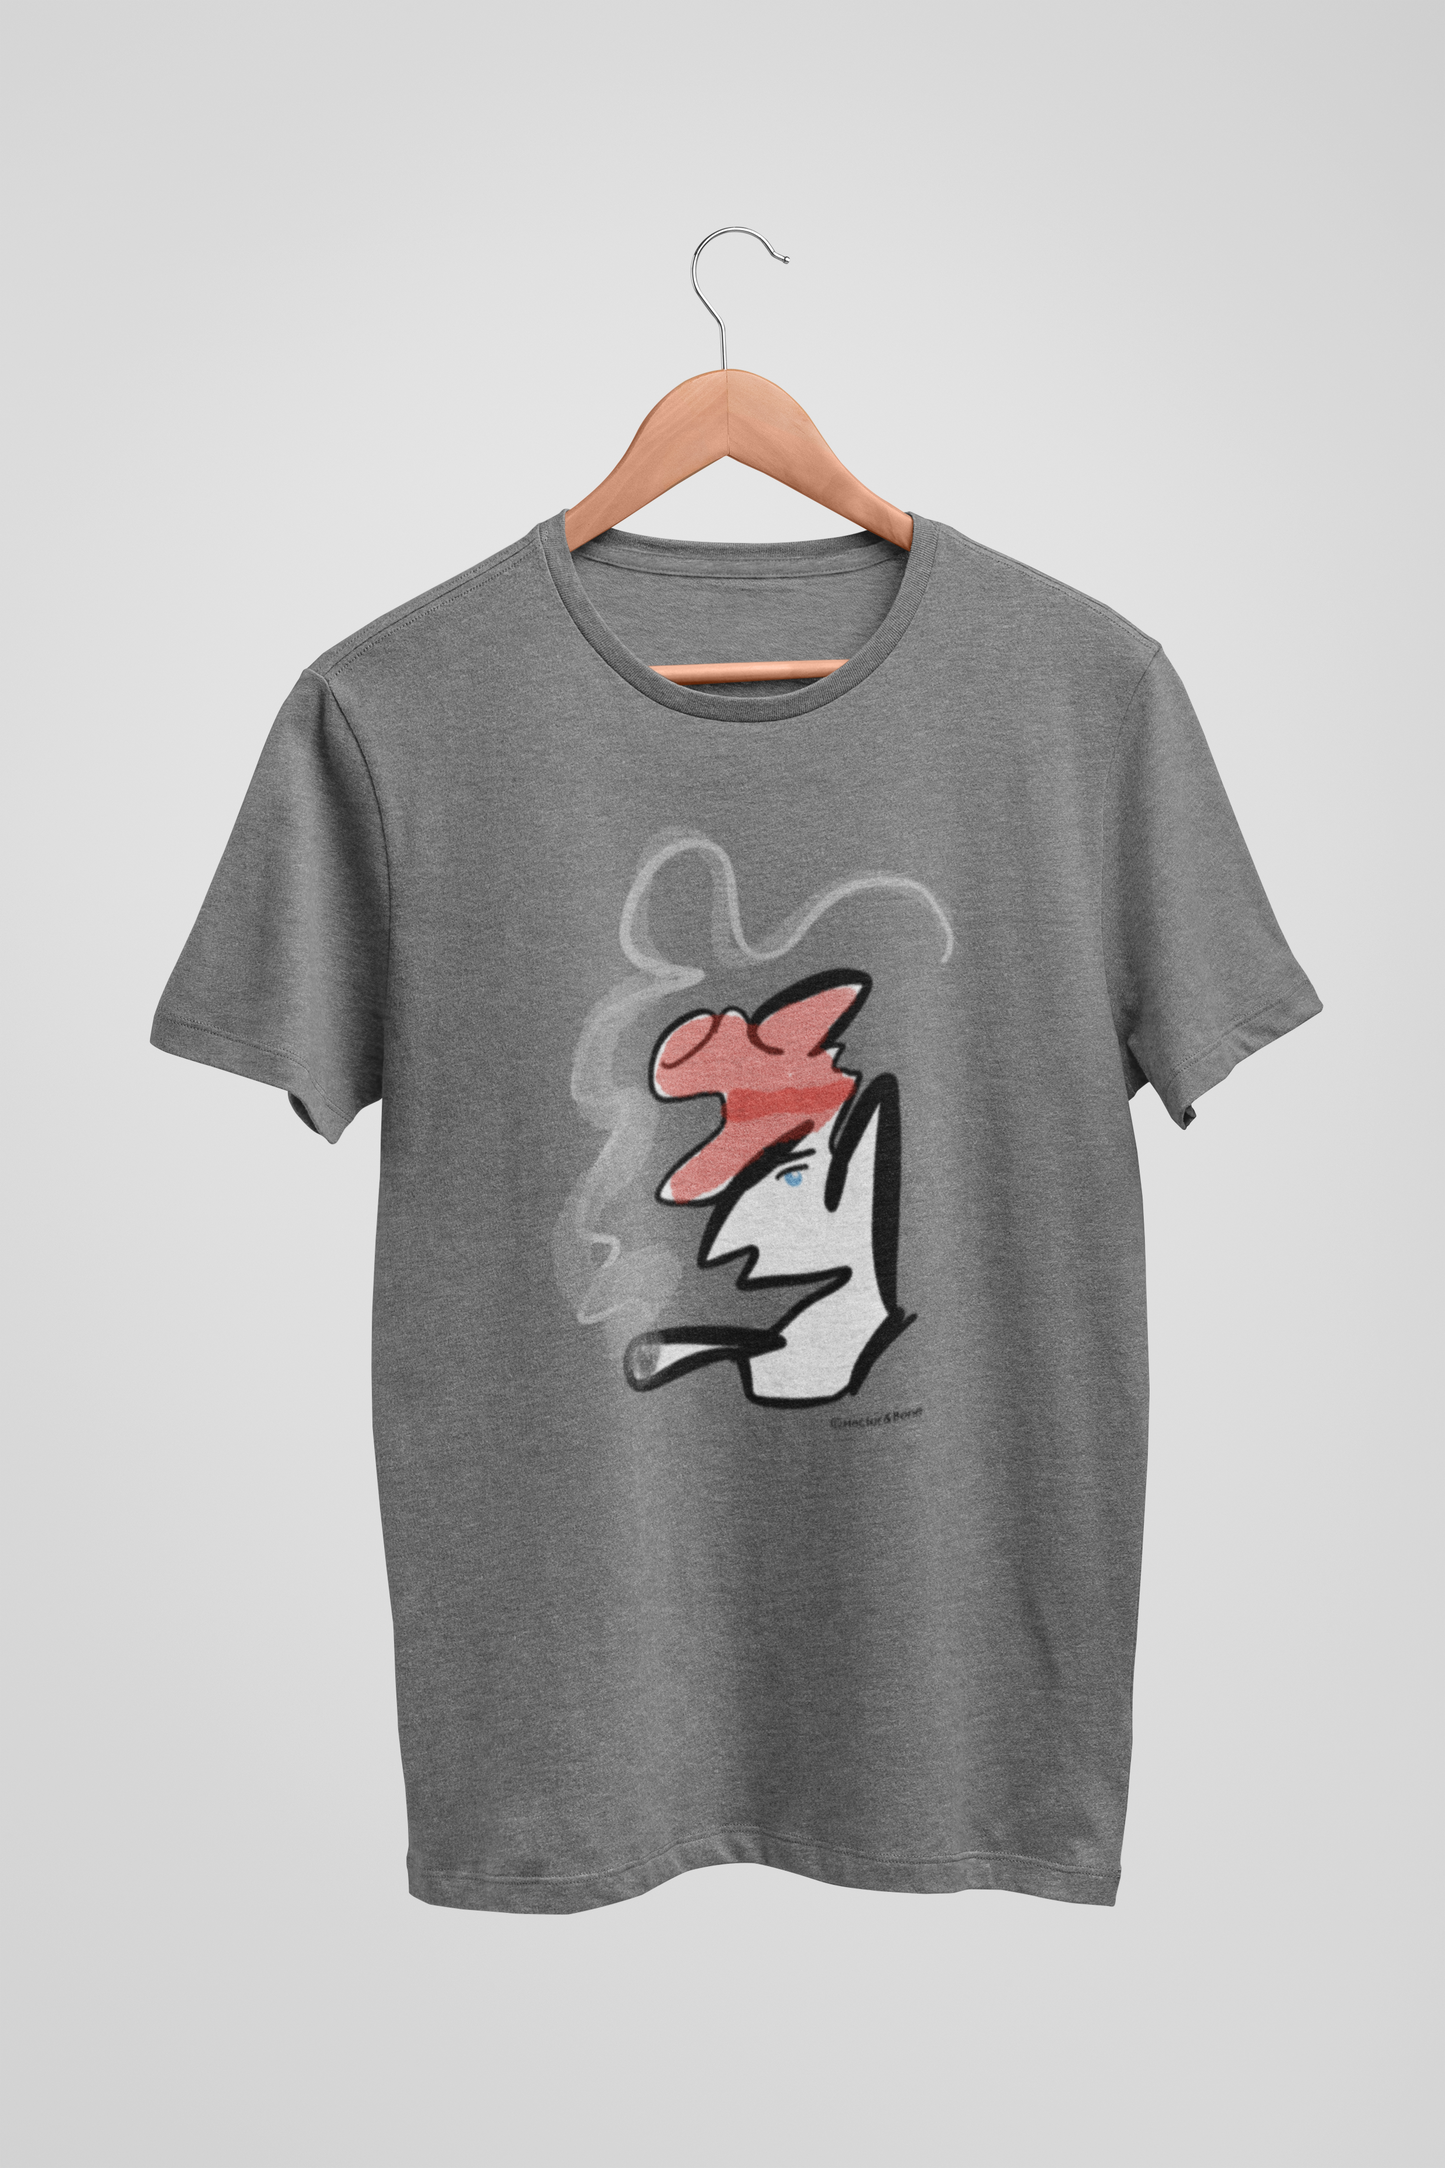 Mid heather grey colour quality vegan cotton t-shirt with Hector and Bone smoking man Monsieur Gaulois illustrated Parisian abstract t-shirt design